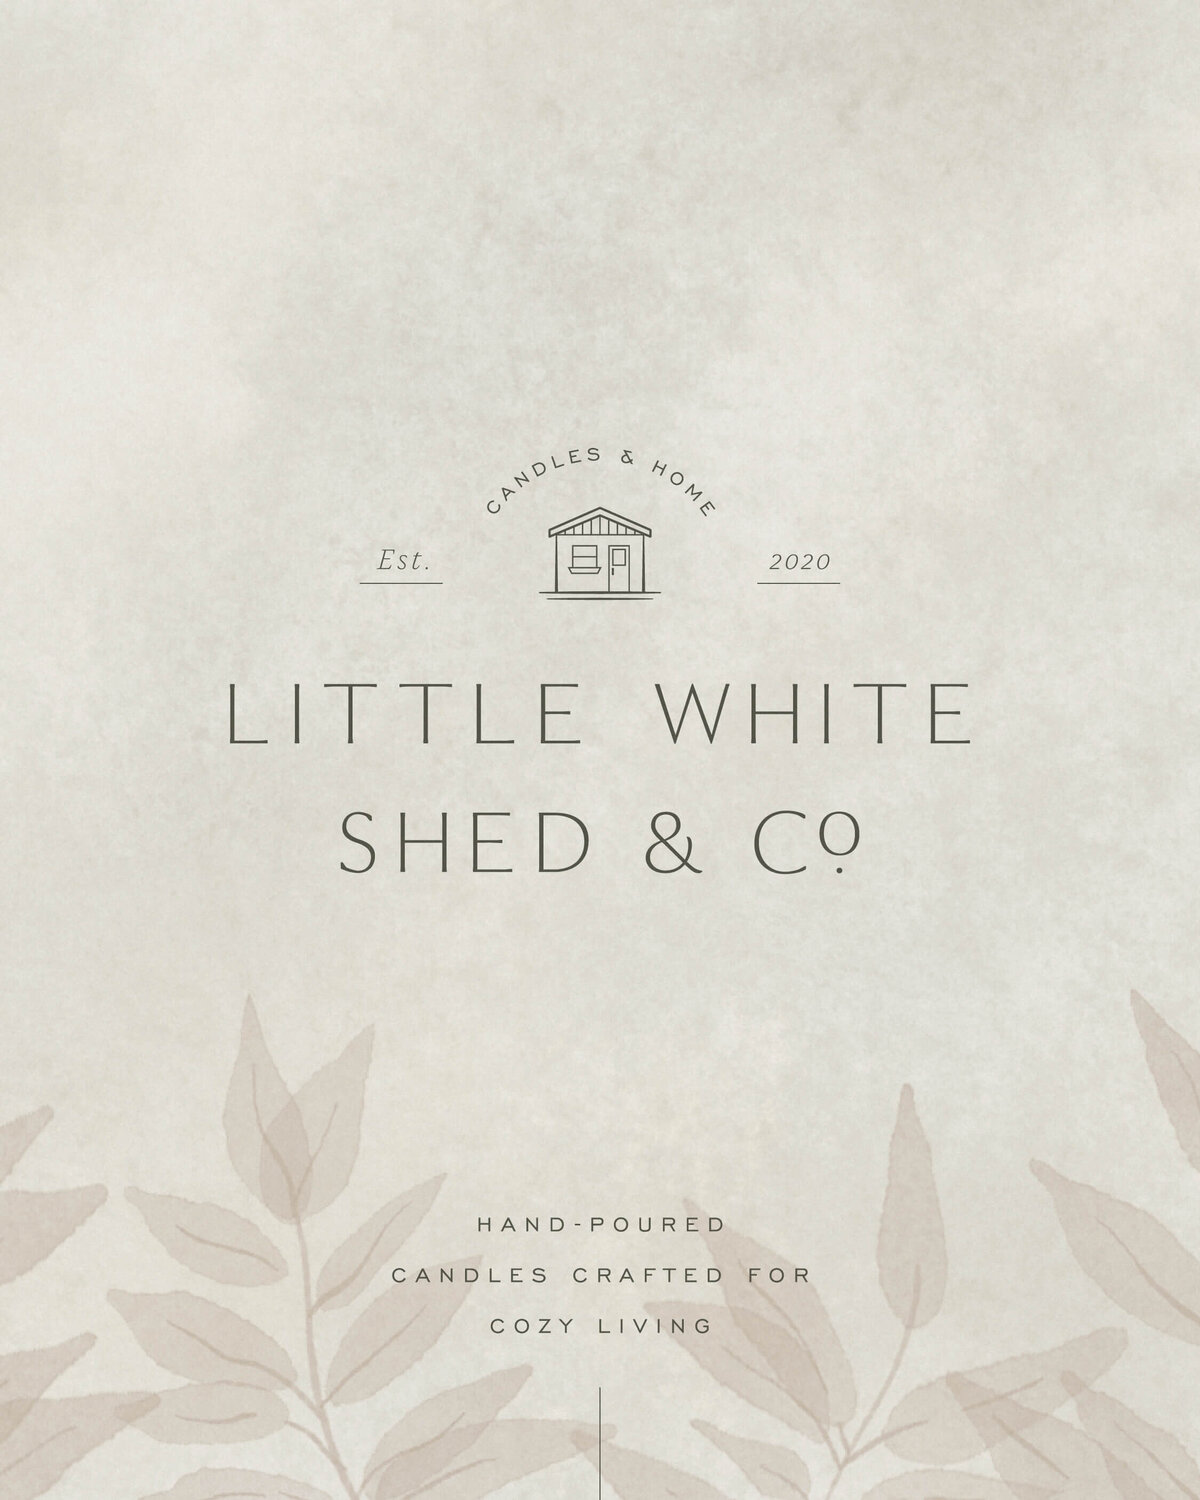 LittleWhiteShed&Co_LaunchGraphics-Instagram7